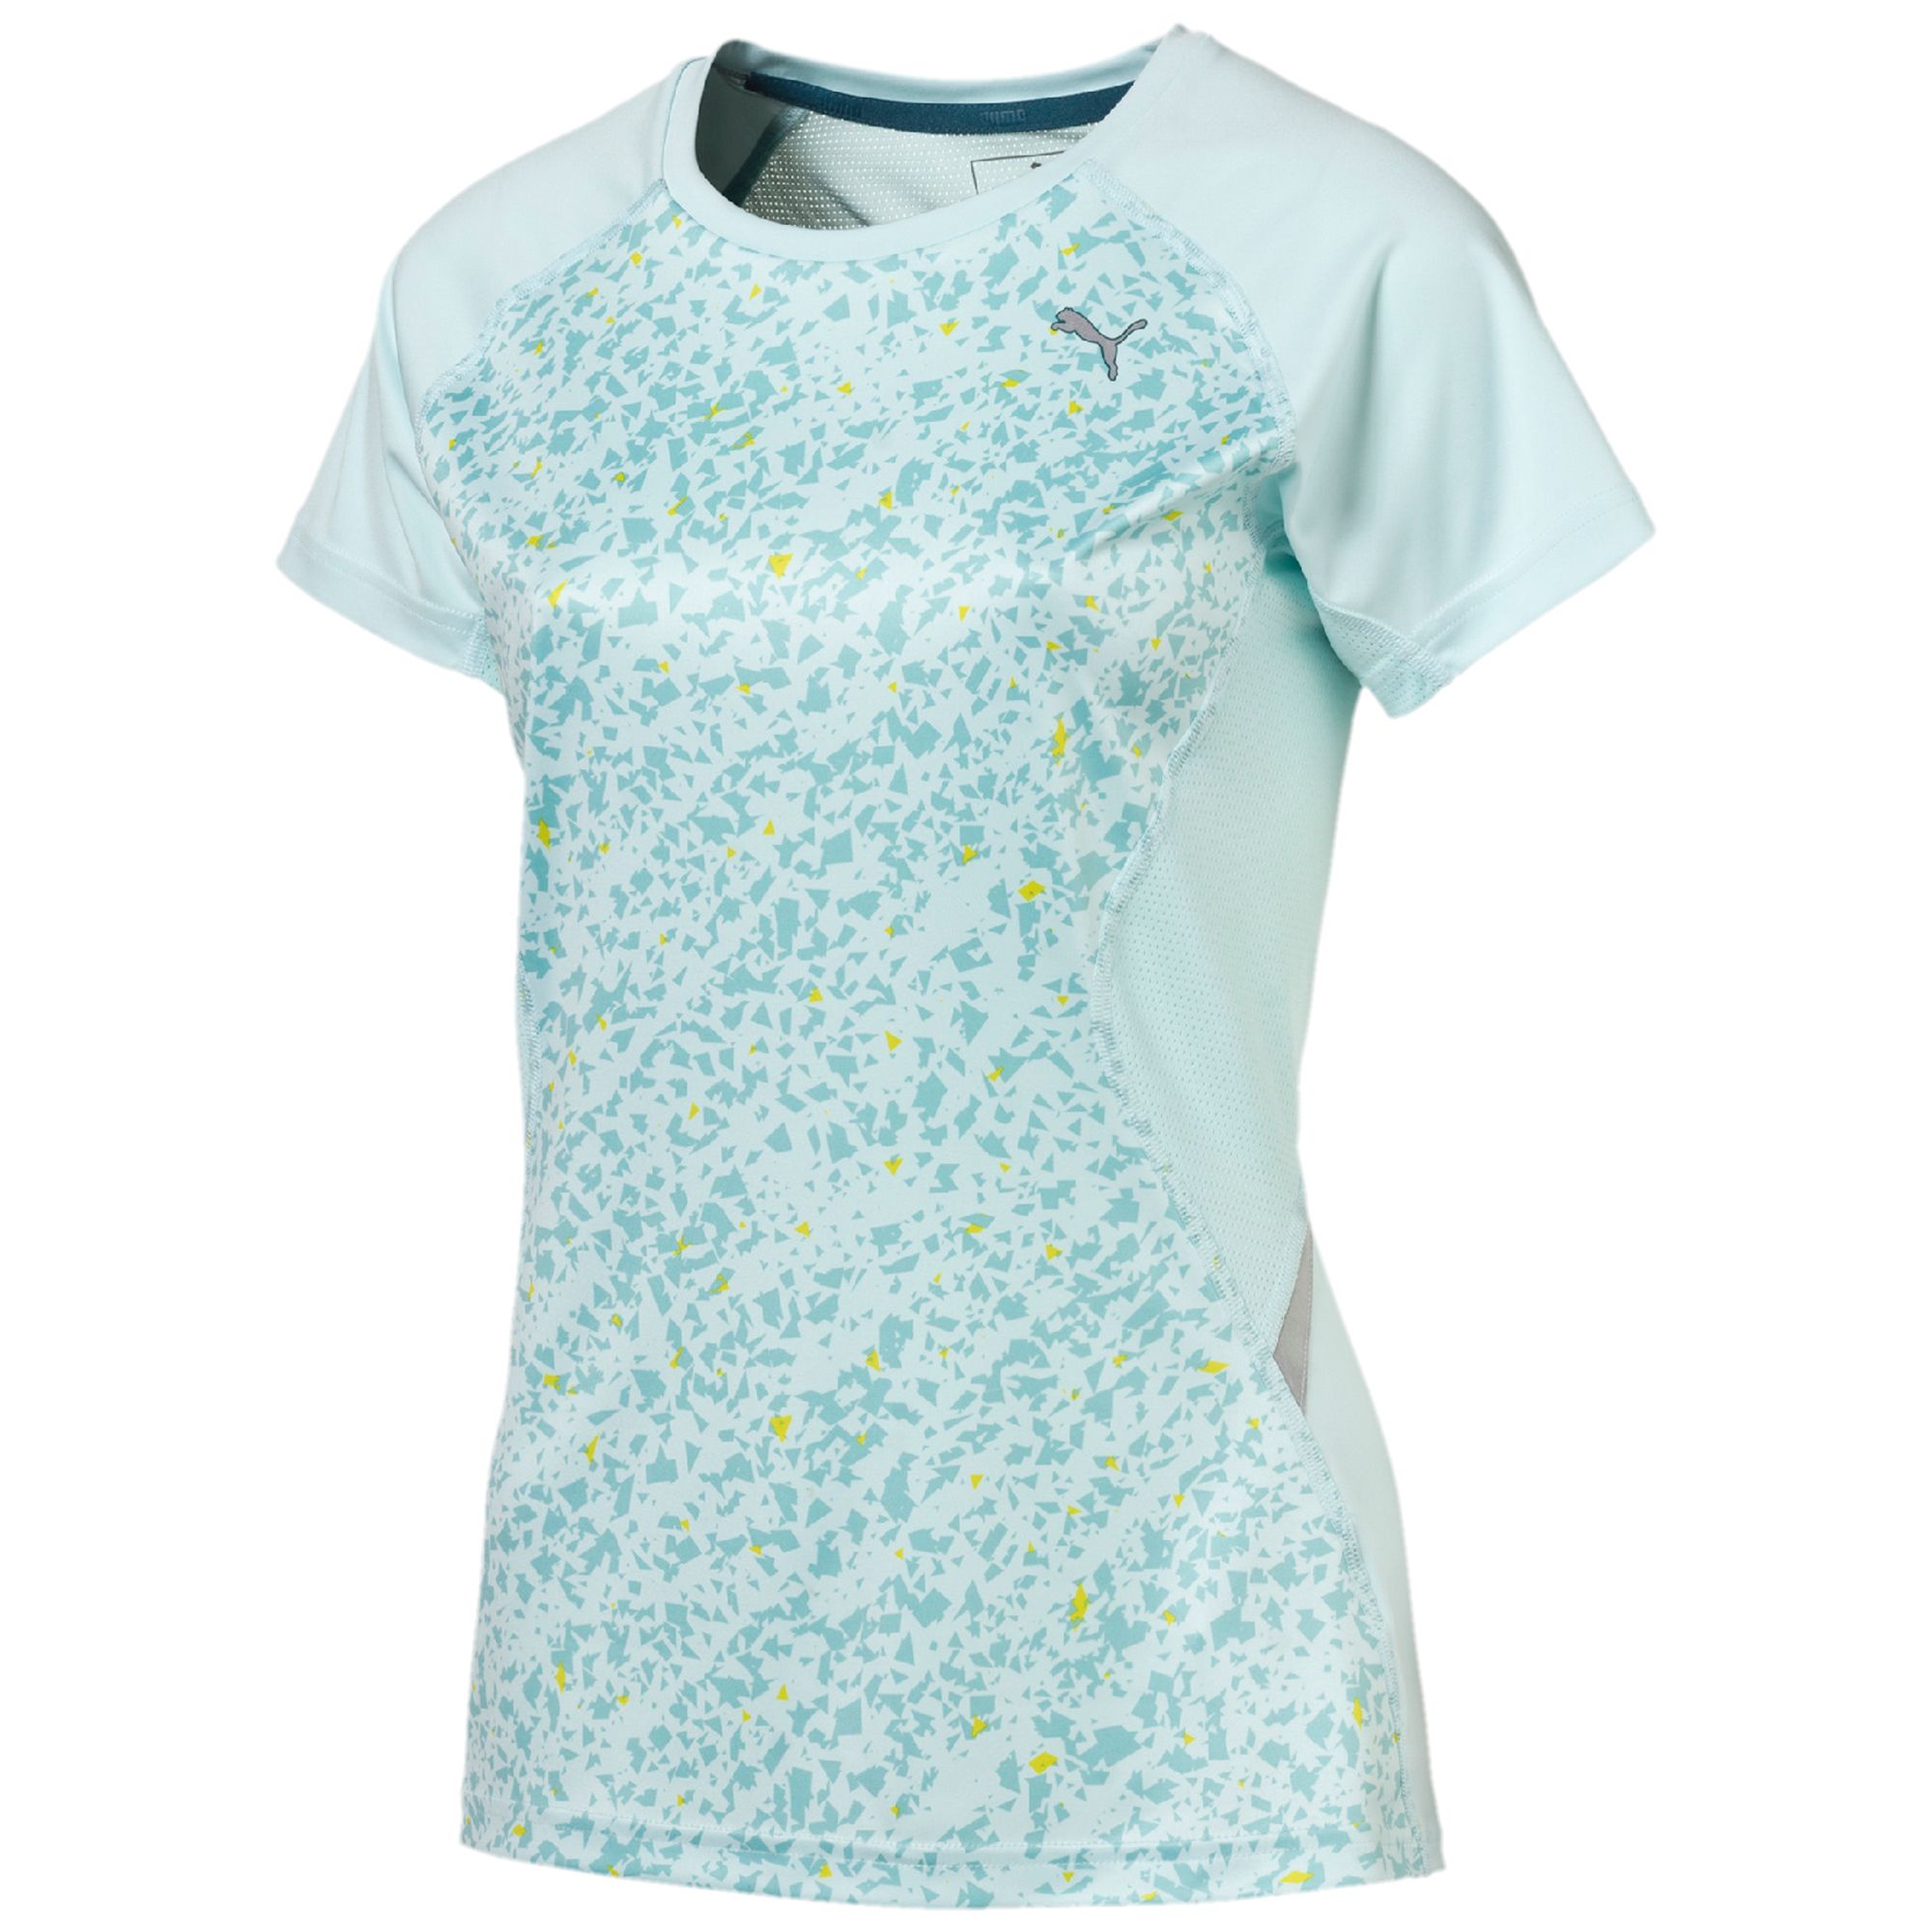  Graphic S/S Tee W - Puma  <br> Graphic S/S Tee W  Graphic S/S Tee W  PUMA   .       ,      coolCELL.   ,     ,  .          .        PUMA.: - 2015 : 100%  Cleansport NXT                 <br><br>color: <br>size US: XS<br>gender: None